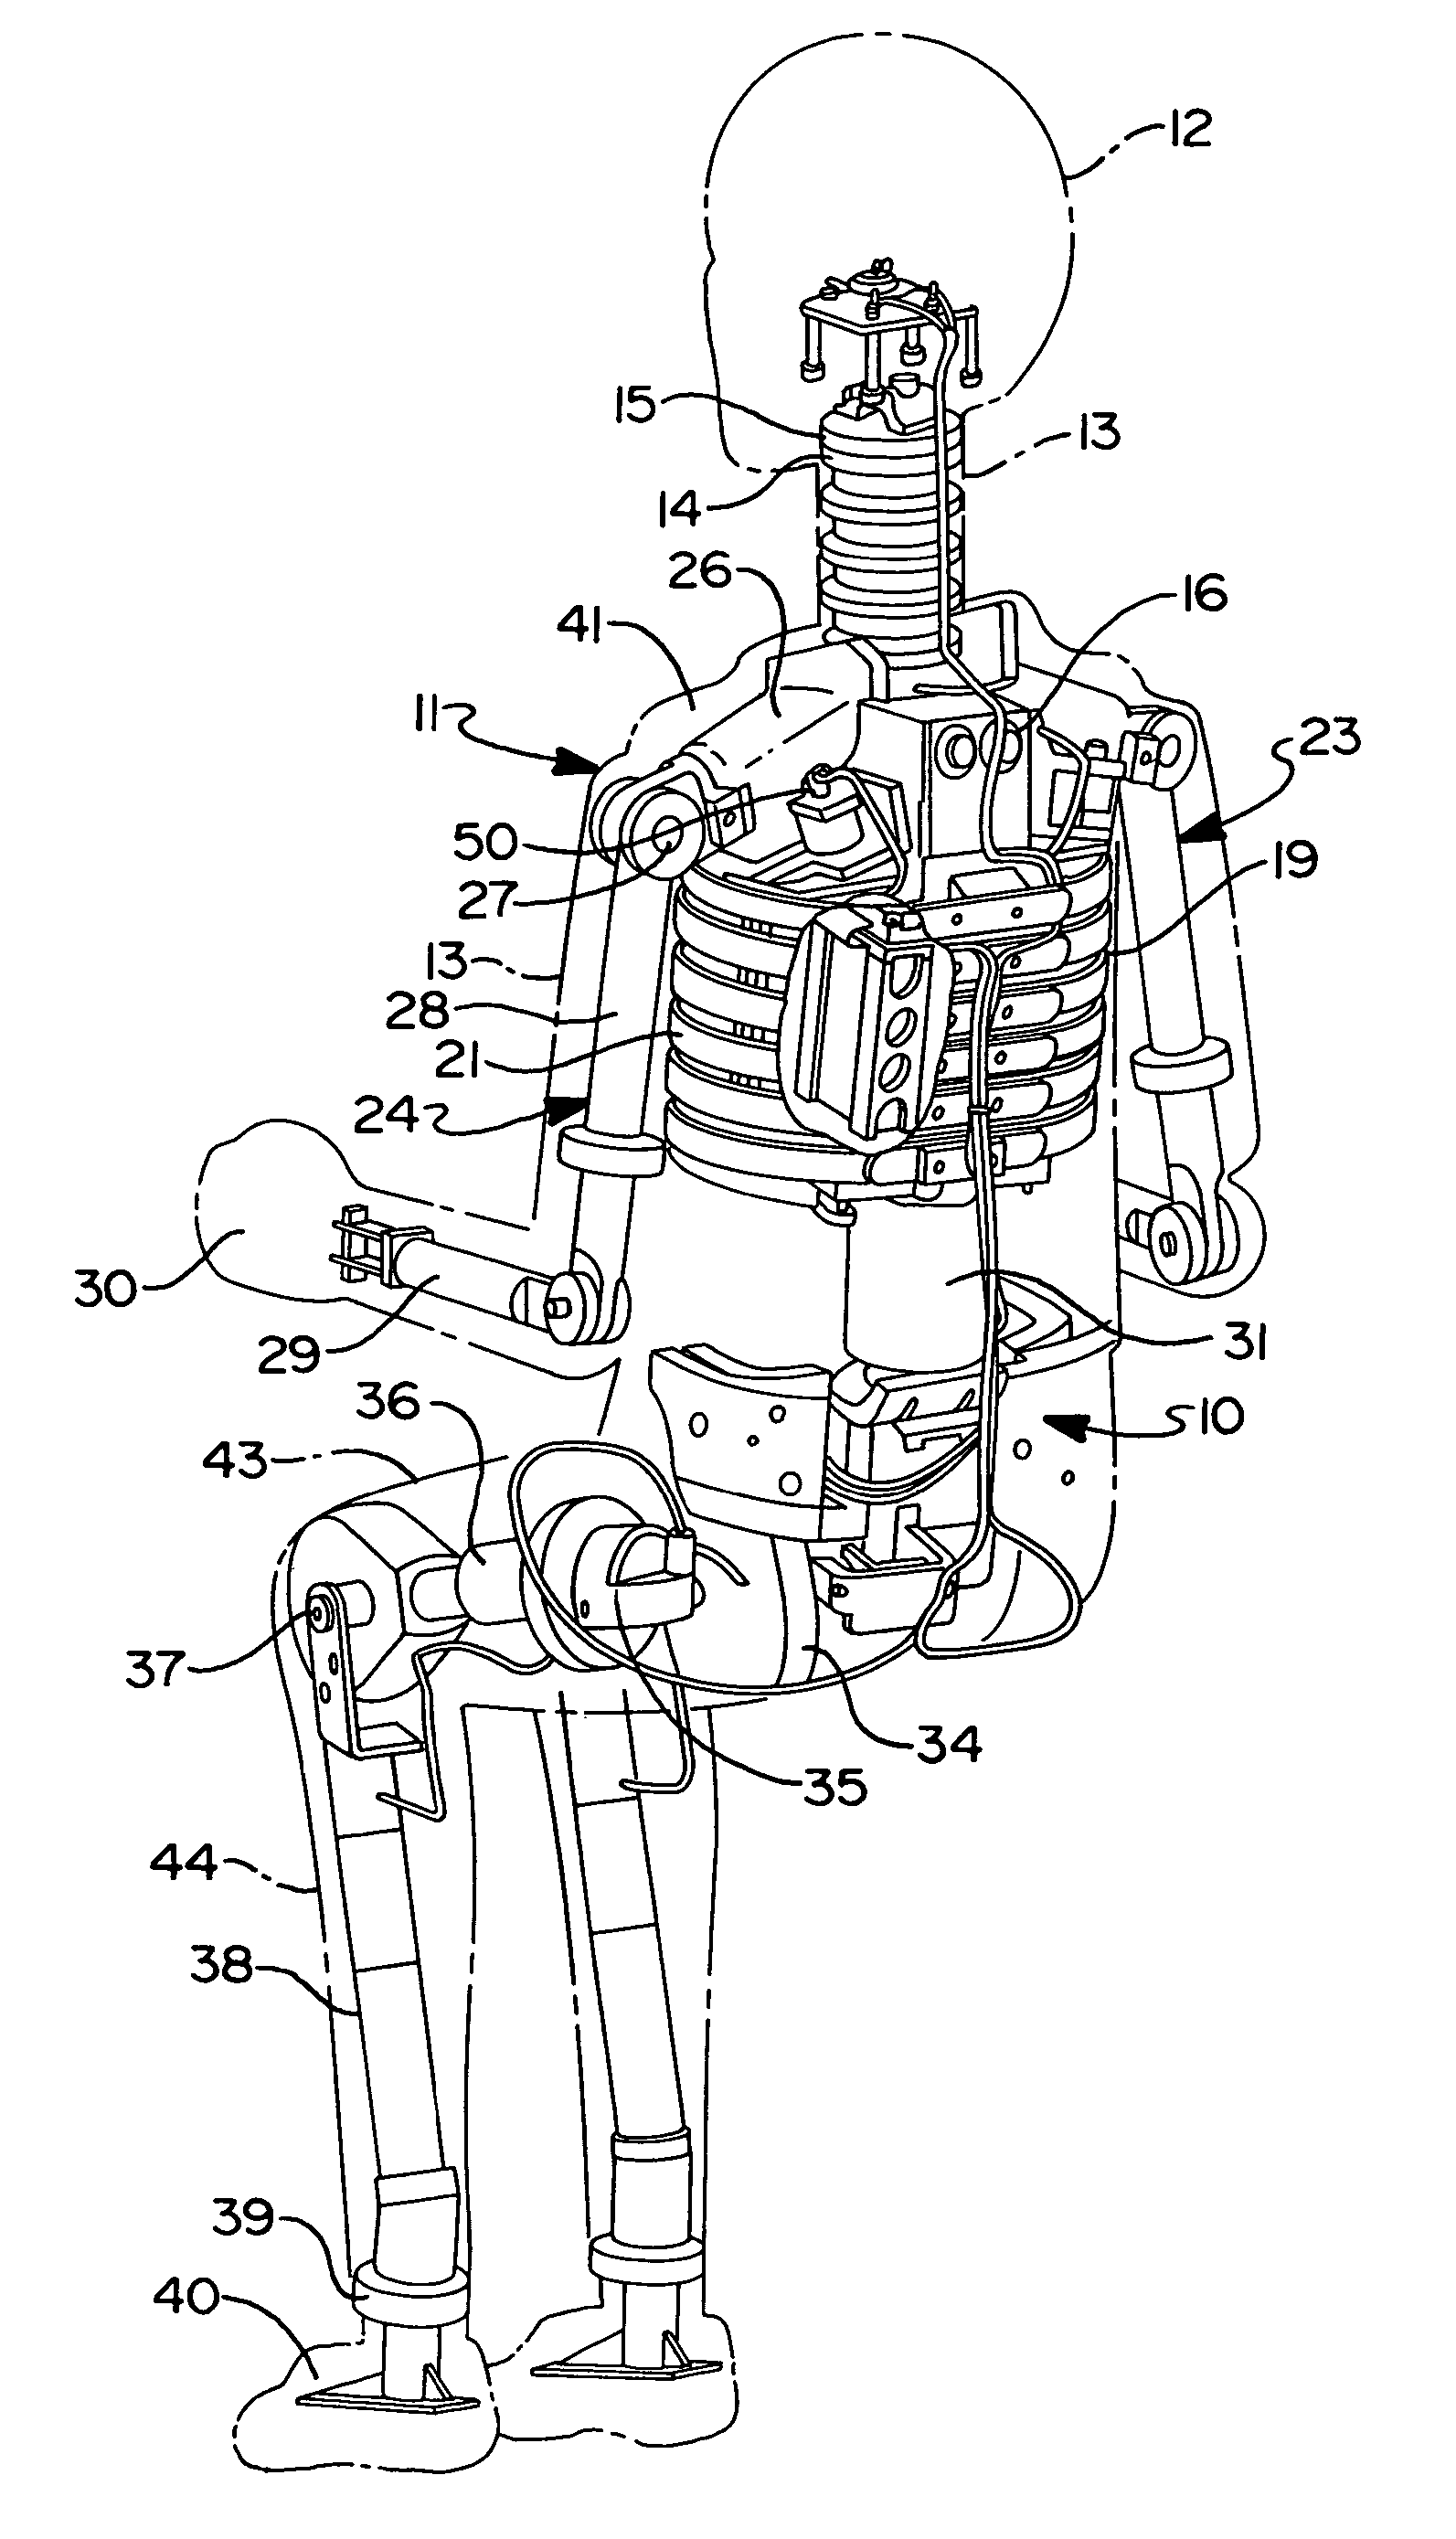 Flexible printed circuit cabling system for crash test dummy